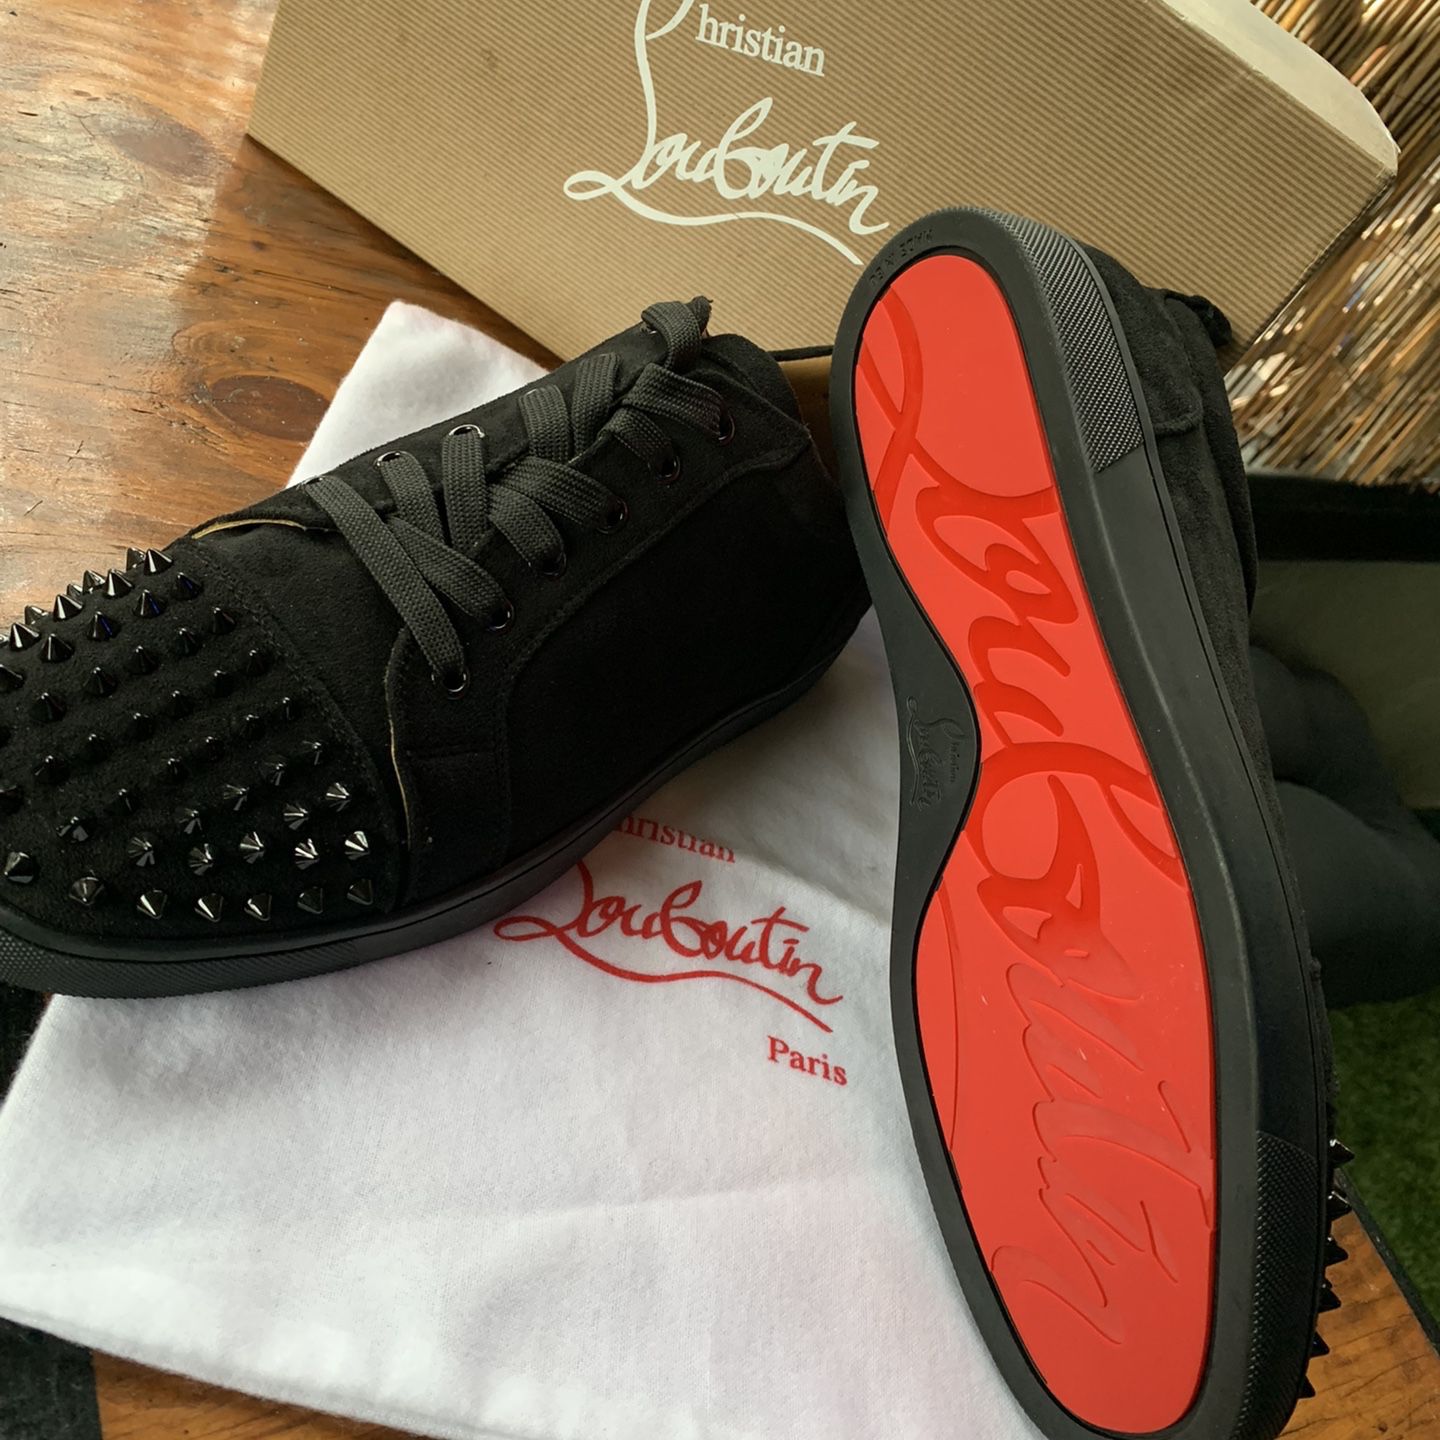 Authentic Christian Louboutin Tote Bag for Sale in Brentwood, CA - OfferUp